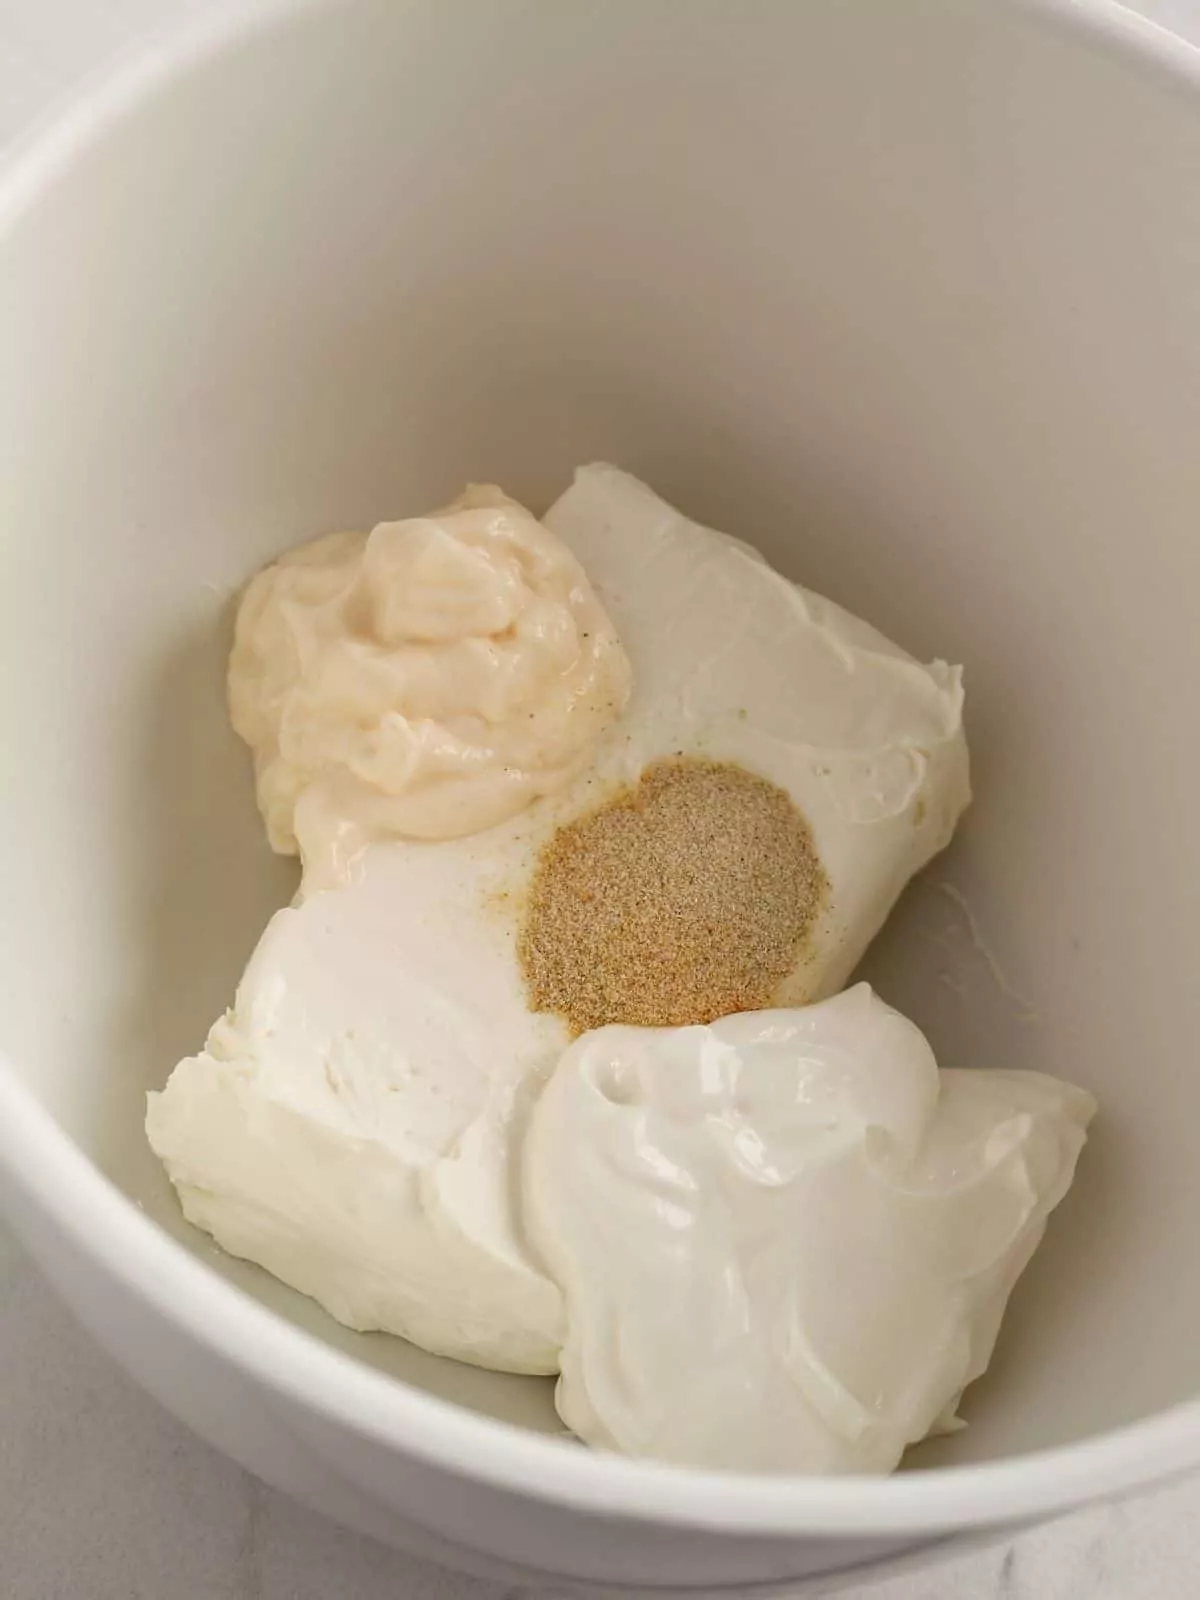 combine seasoning mixes with cream cheese and mayonnaise in white bowl.